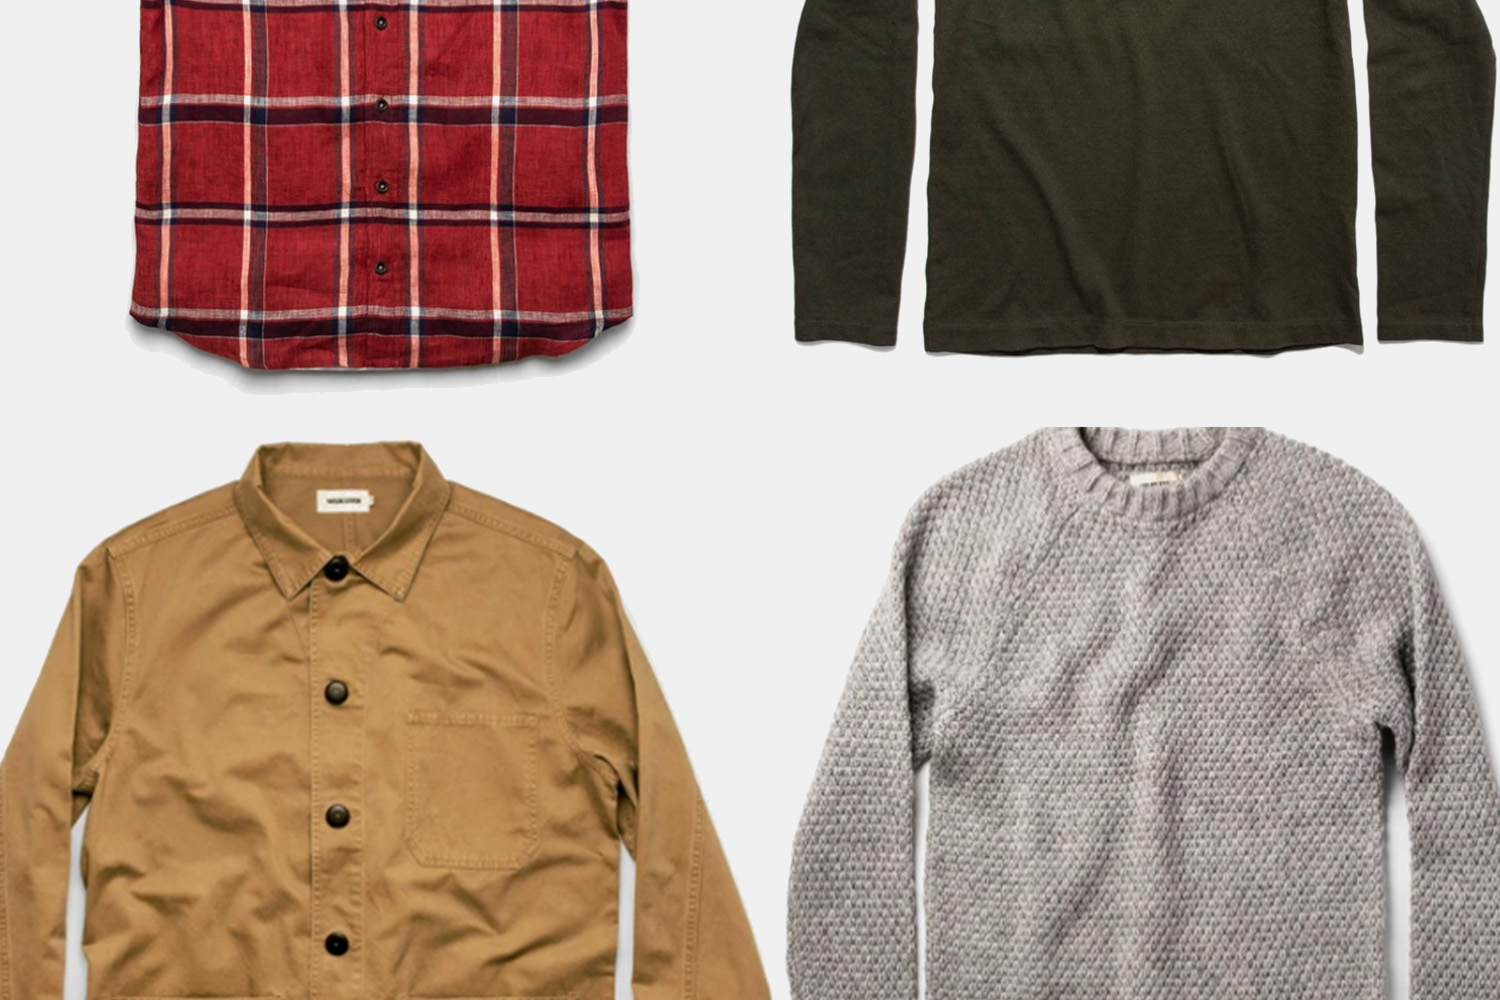 Taylor Stich Labor Day sale menswear, including shirts, sweaters and jackets